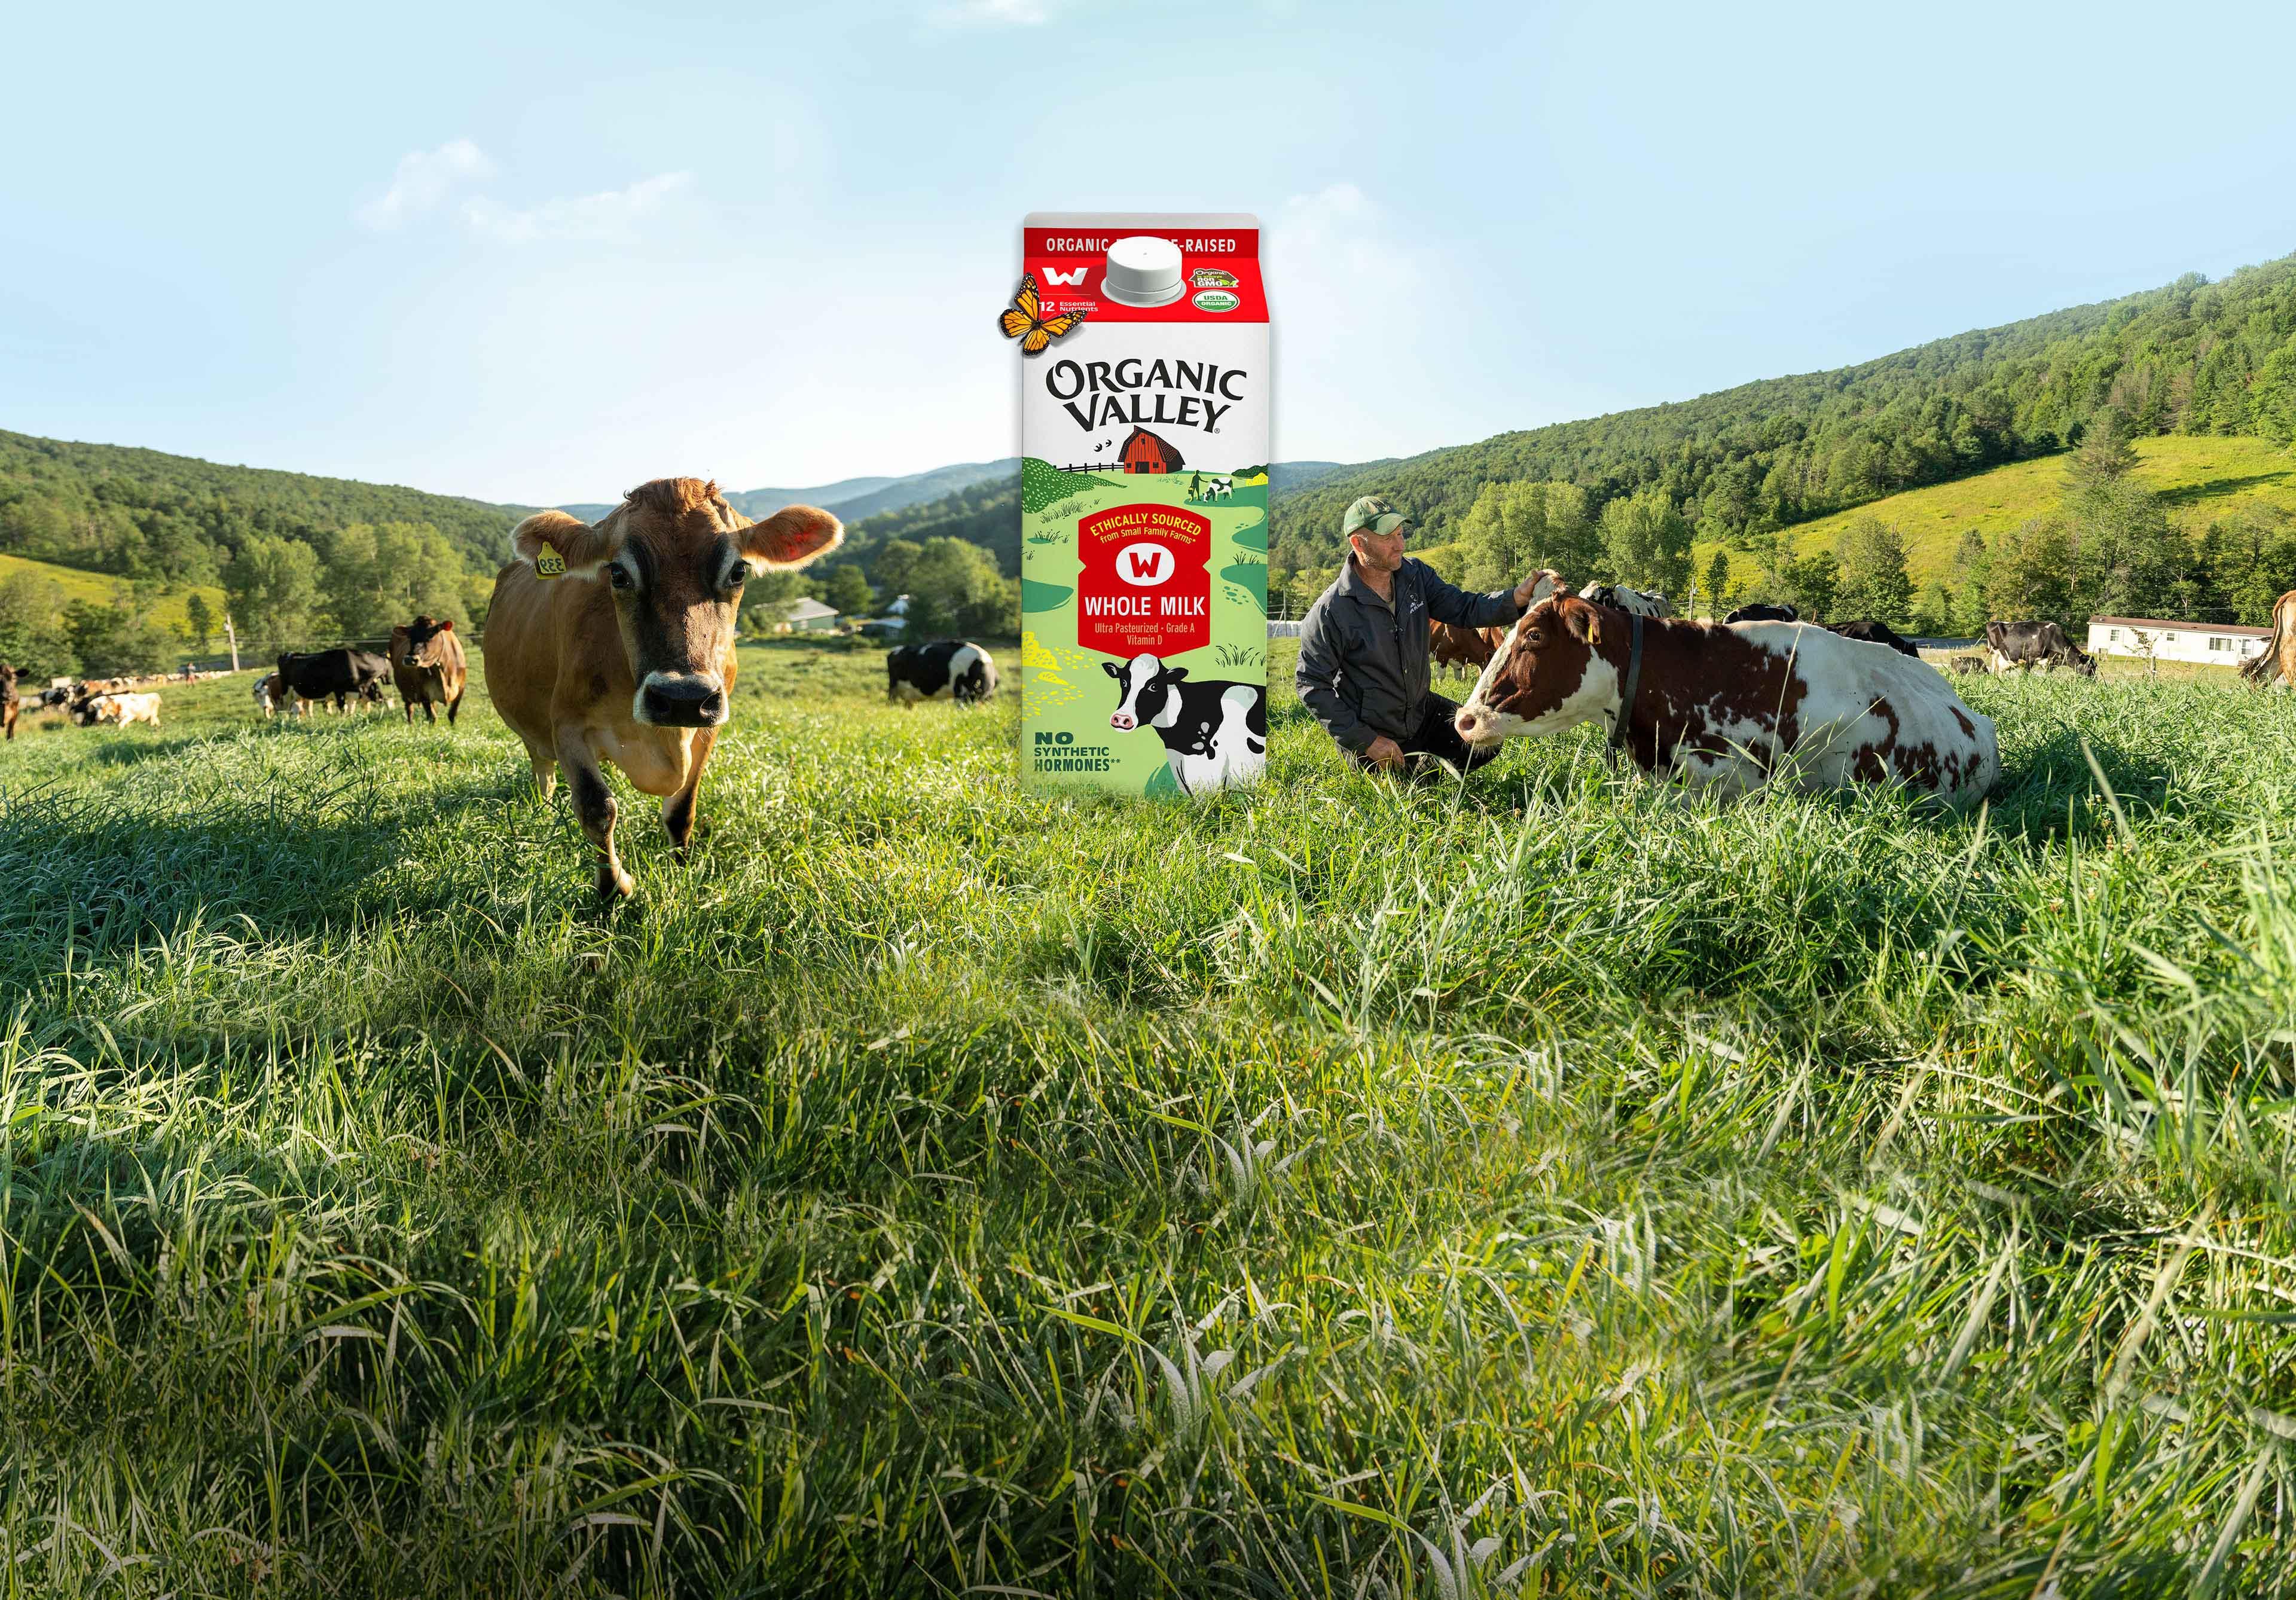 Cows in lush green pasture grass with a farmer and a half gallon carton of Organic Valley Whole Milk.